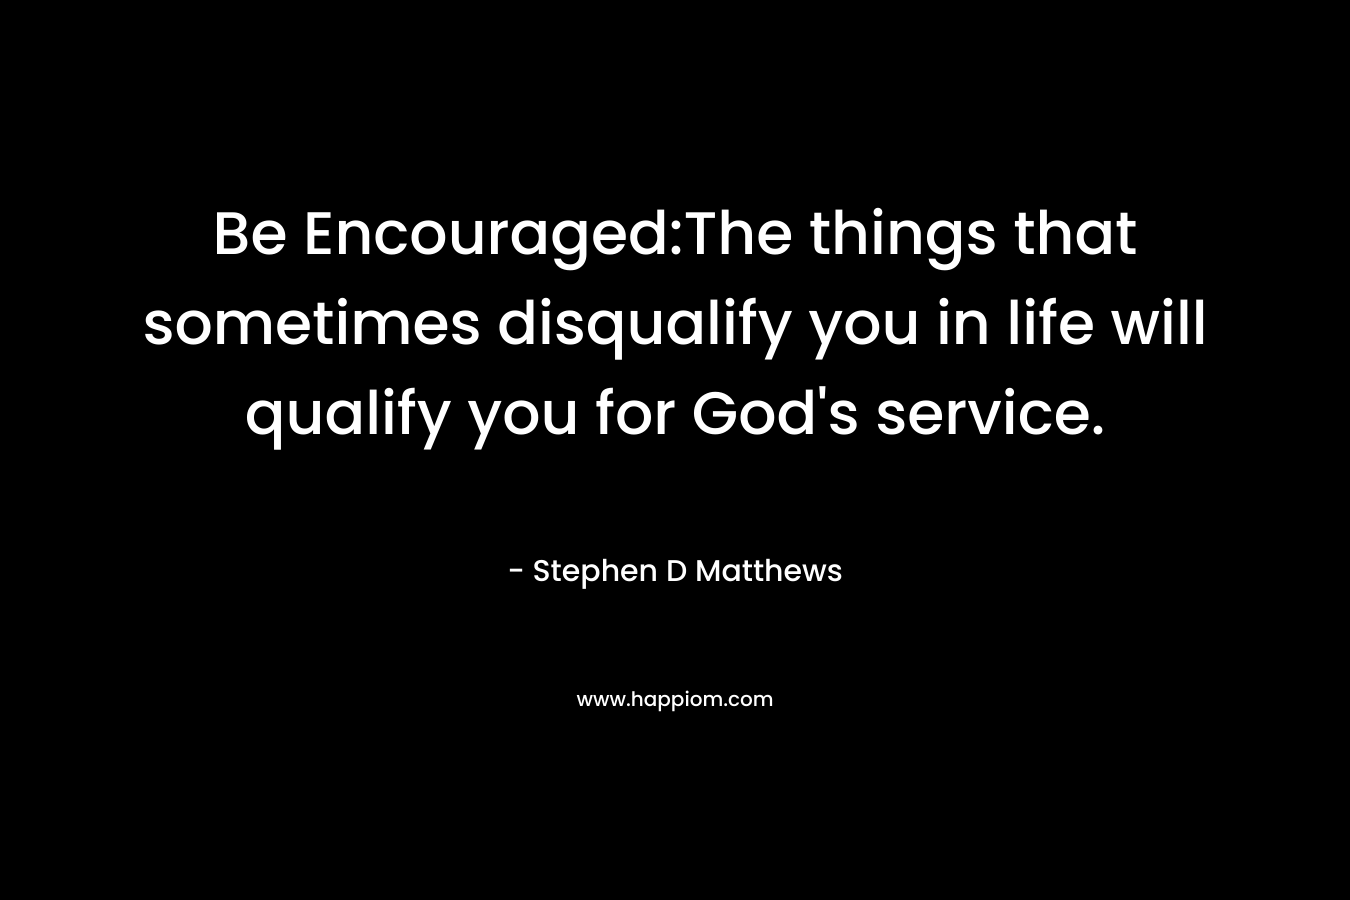 Be Encouraged:The things that sometimes disqualify you in life will qualify you for God’s service. – Stephen D Matthews